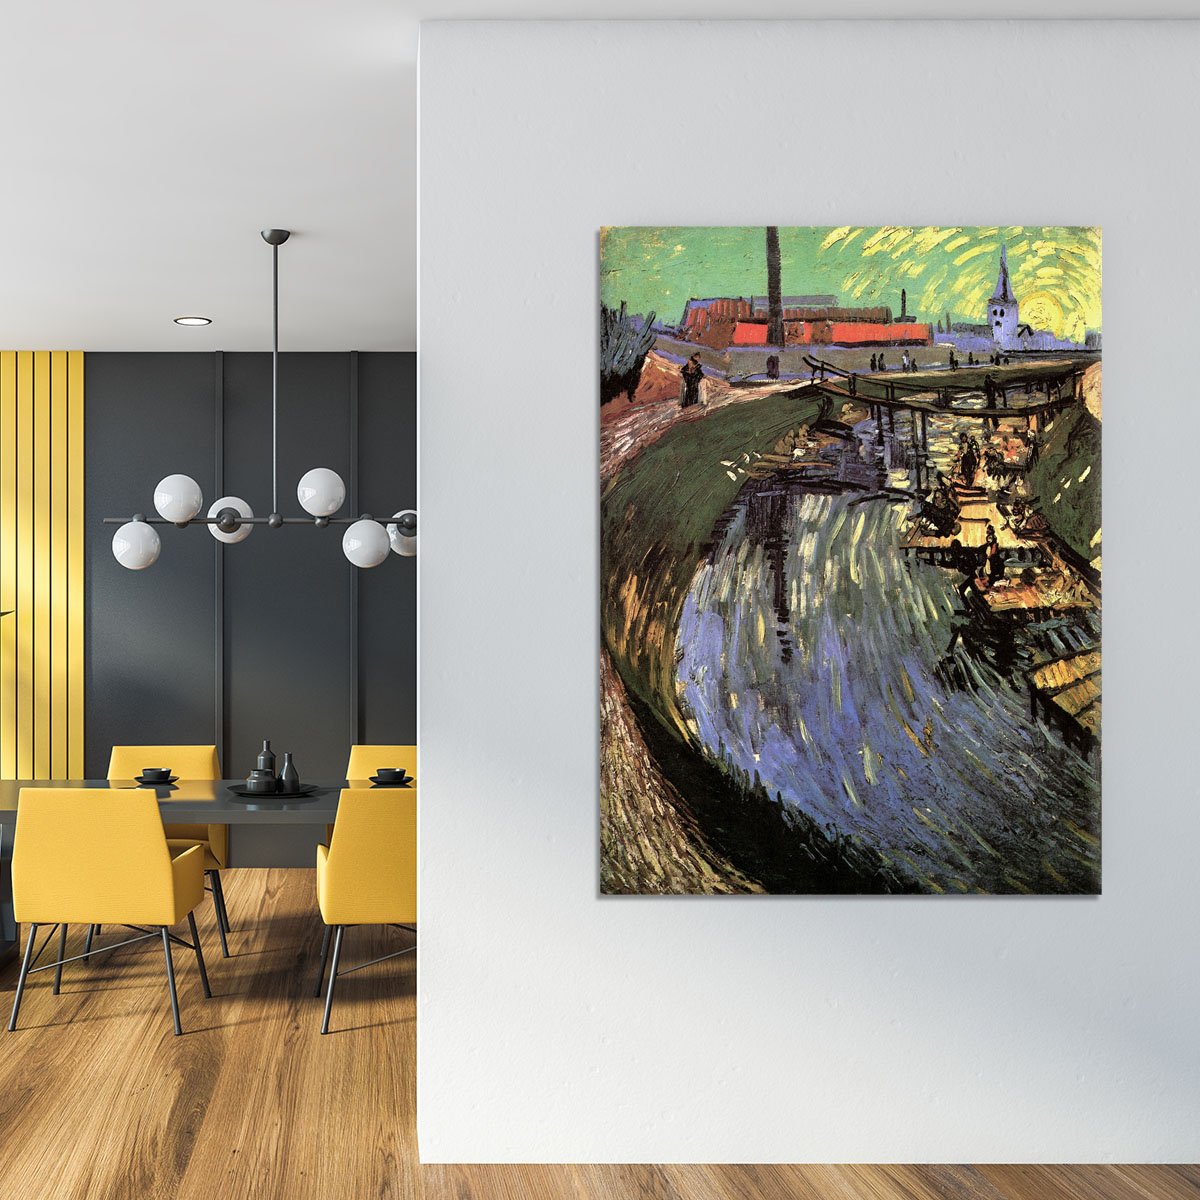 Canal with Women Washing by Van Gogh Canvas Print or Poster